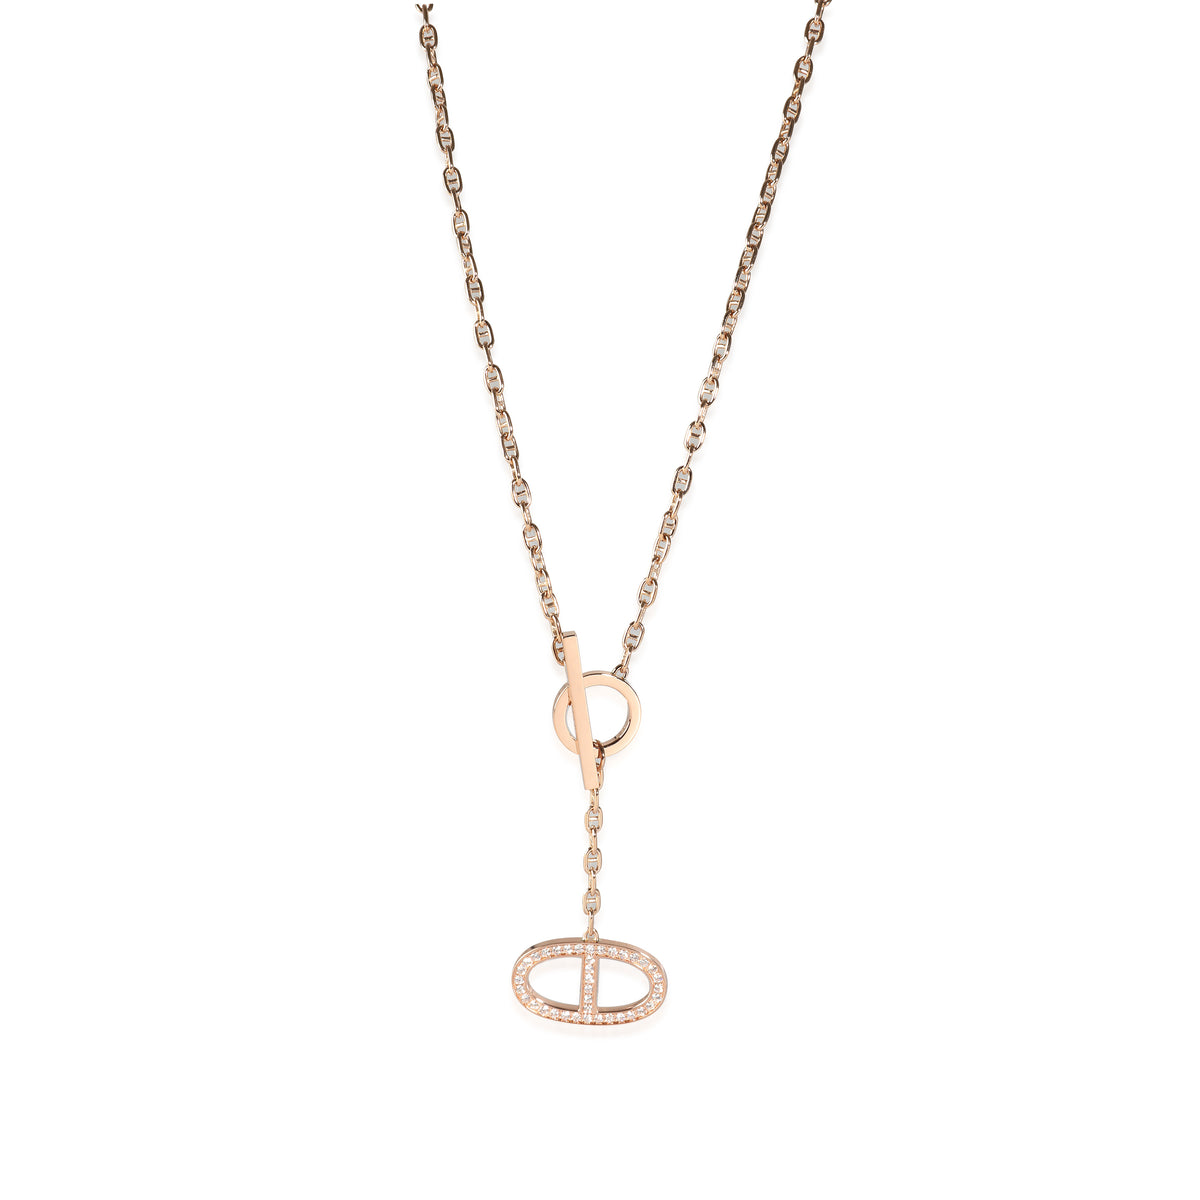 Chaine d'ancre Fashion Necklace in 18k Rose Gold 0.3 CTW